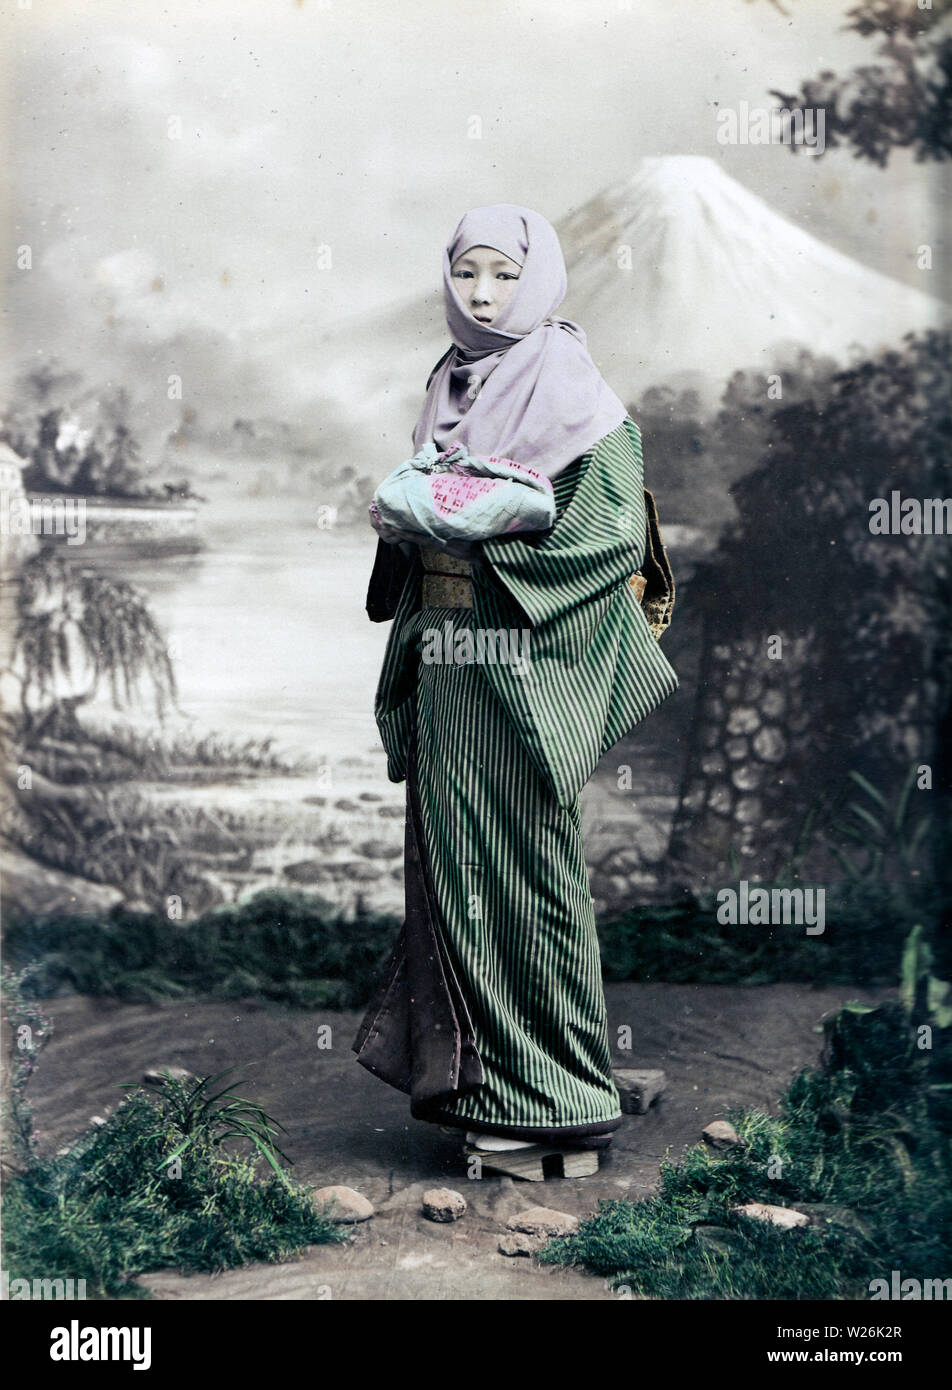 [ 1890s Japan - Japanese Woman in Winter Clothes ] —   A woman in a thick winter kimono has an okosozukin wrapped around her head to protect herself against the winter cold. In her hands she holds something wrapped in a furoshiki, a Japanese wrapping cloth. She is wearing geta and her hair is done in a traditional manner.  19th century vintage albumen photograph. Stock Photo